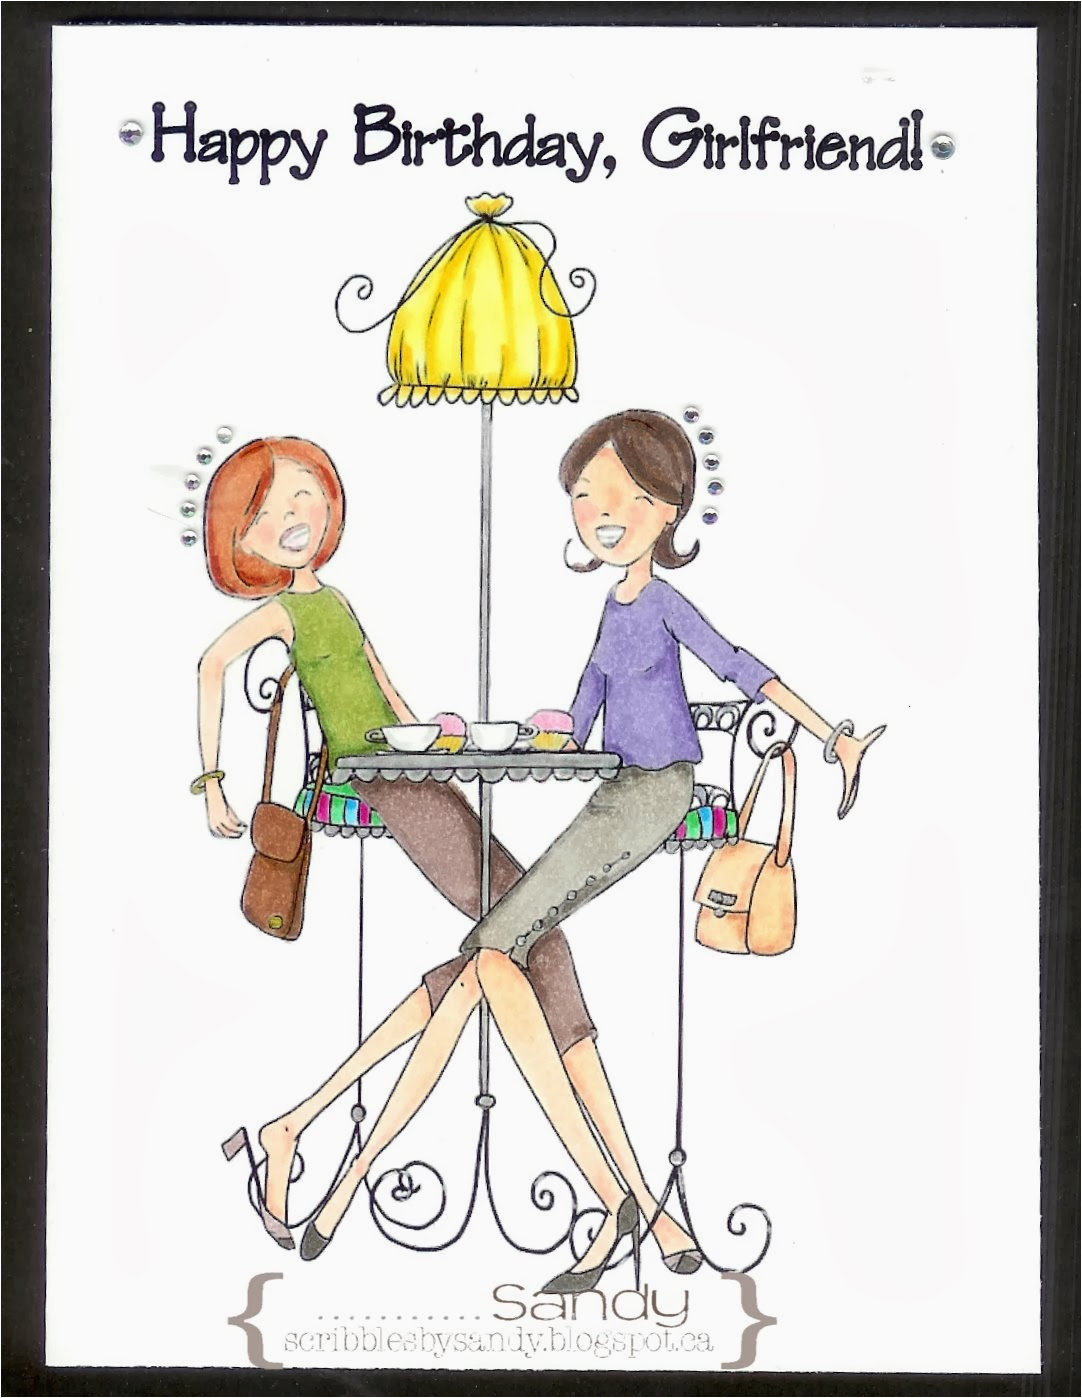 Happy Birthday Girlfriend Funny Images Scribbles by Sandy August 2013